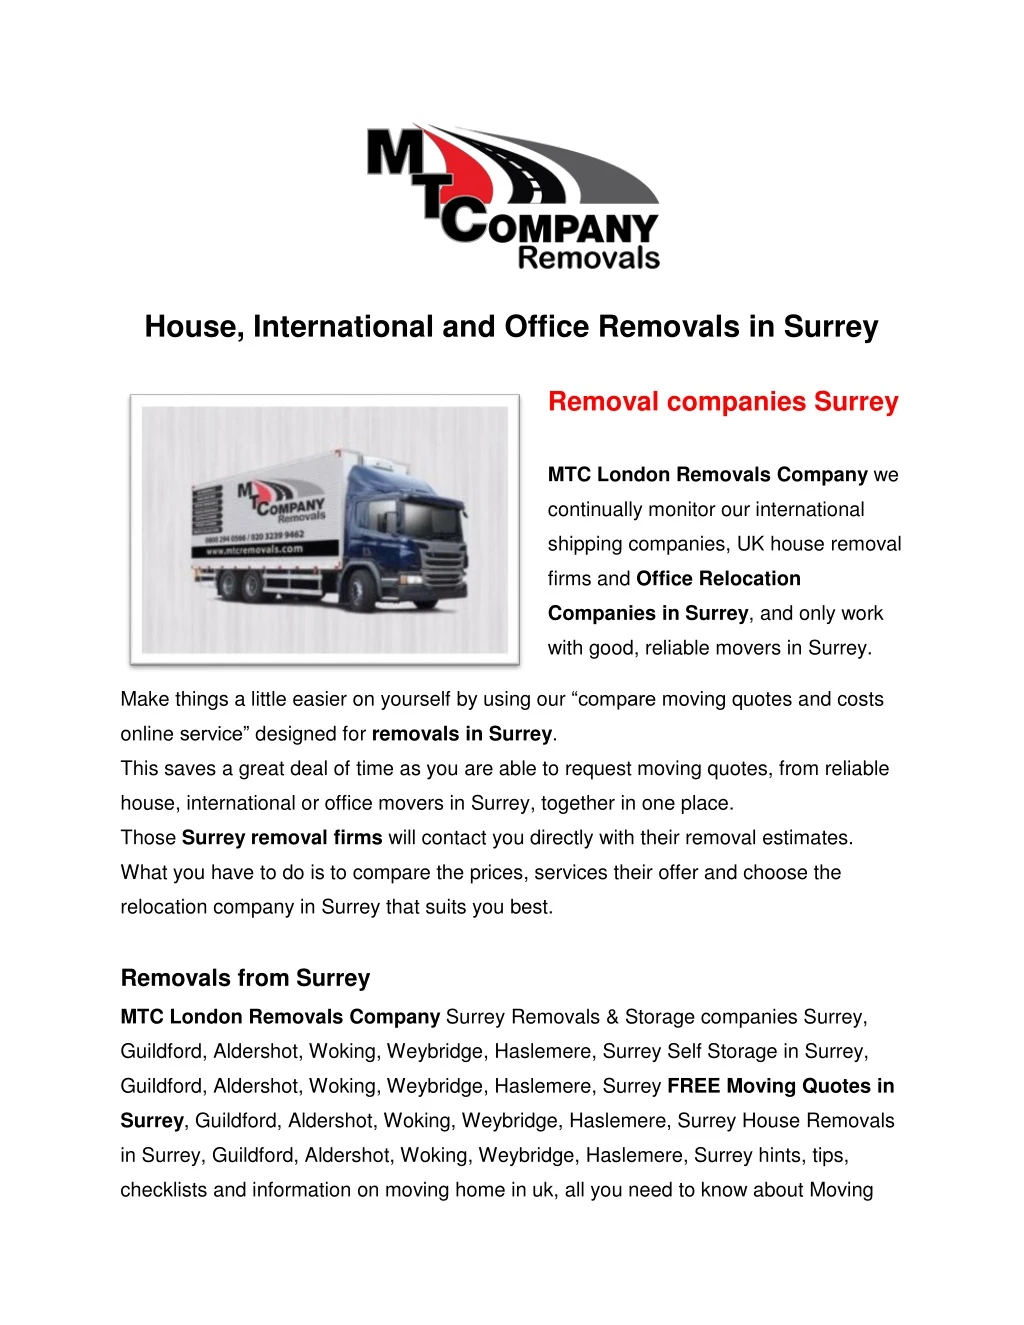 house international and office removals in surrey